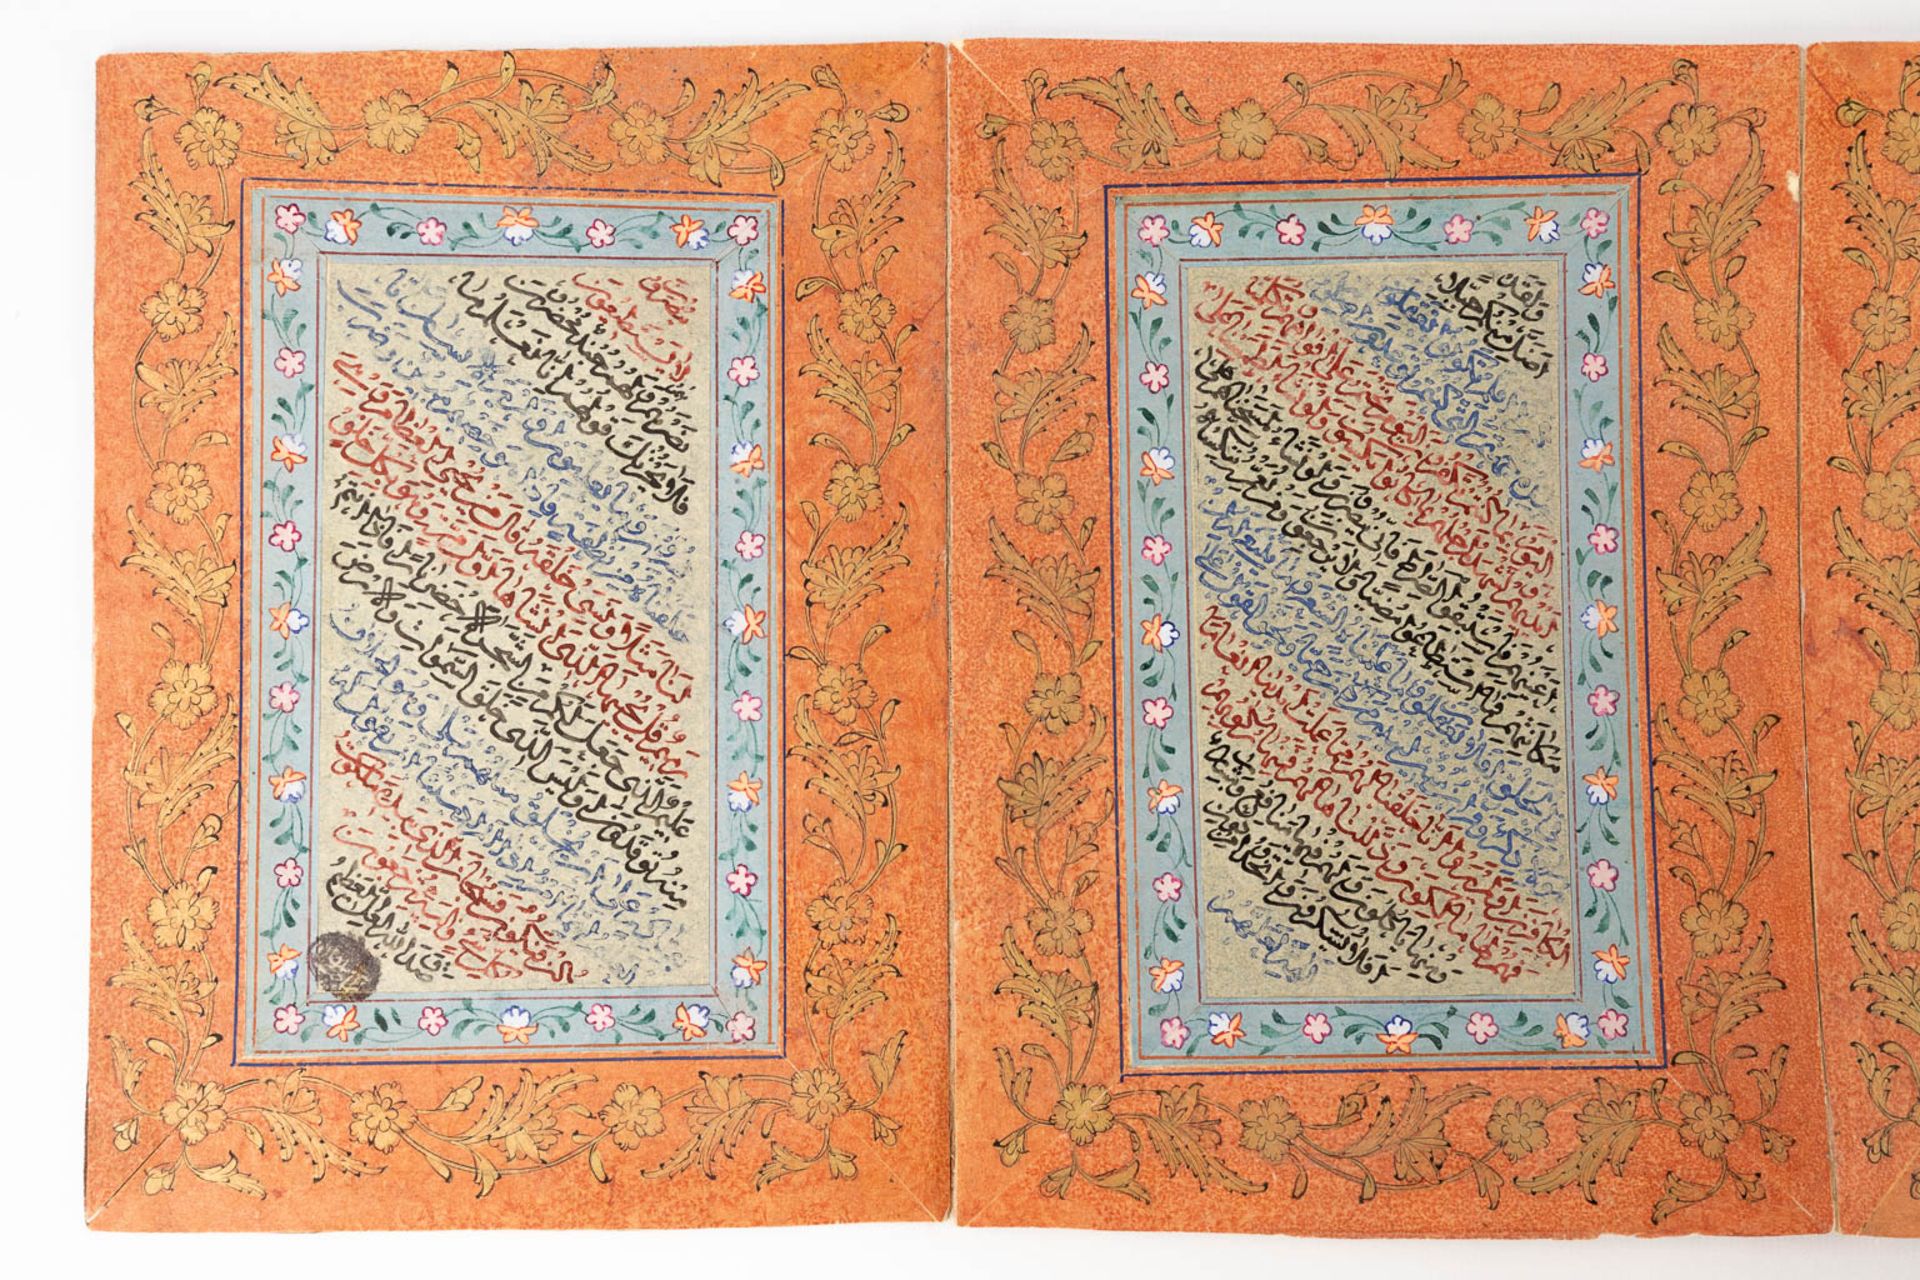 An album of Ottoman Calligraphic Panels (QITA) early 20th C. (W:15 x H:20 cm) - Image 4 of 12